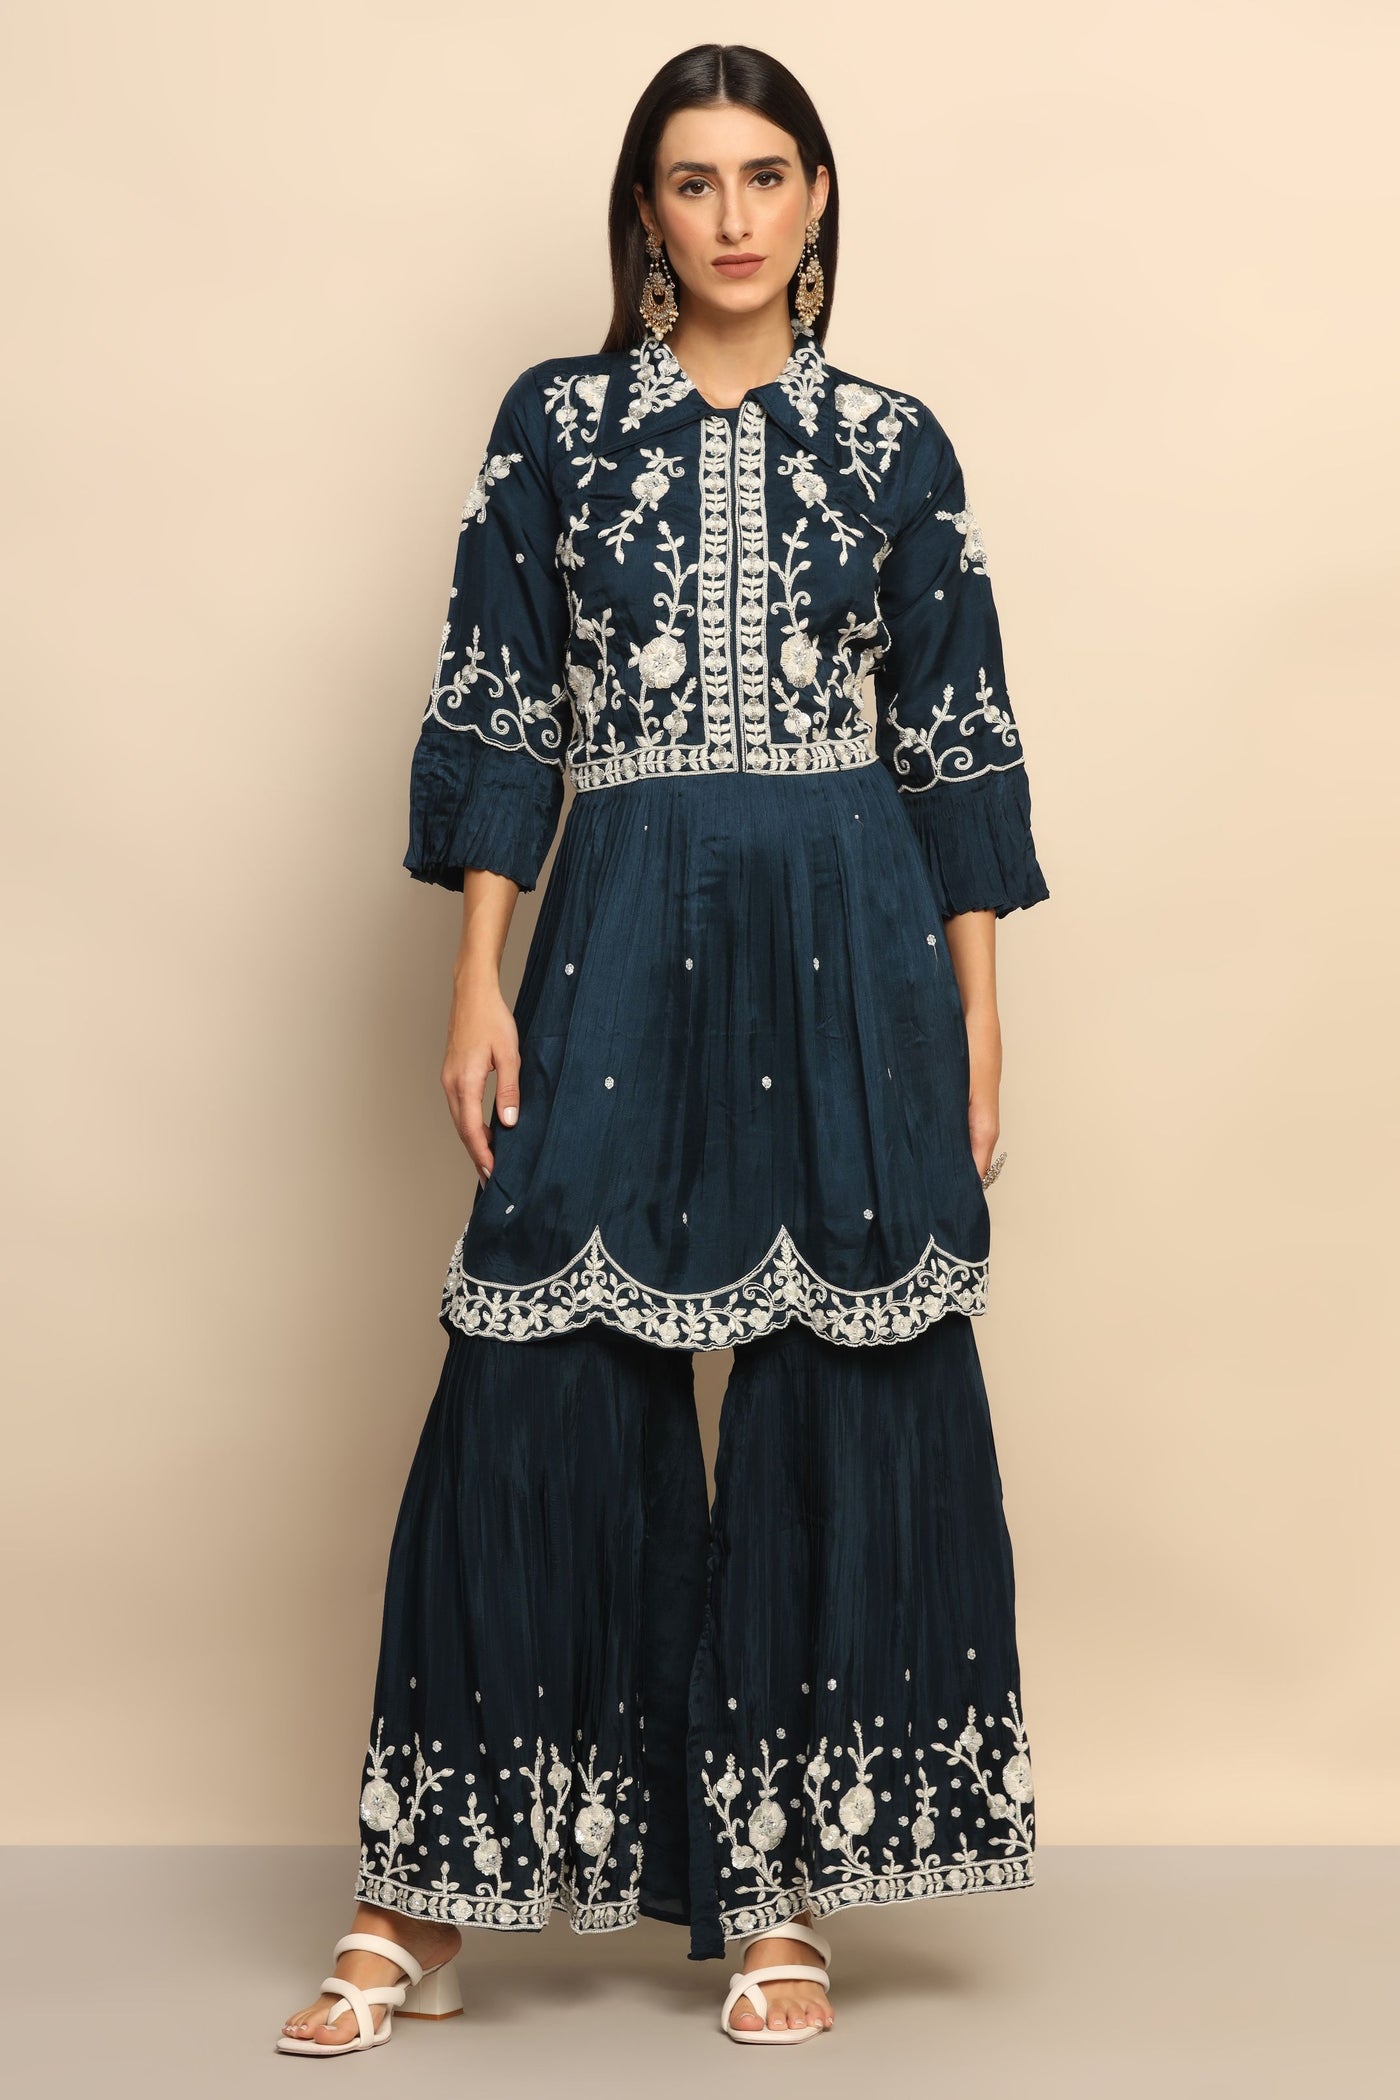 Enchanting Navy Blue Sequin Thread Work Dress - Perfect for Special Occasions